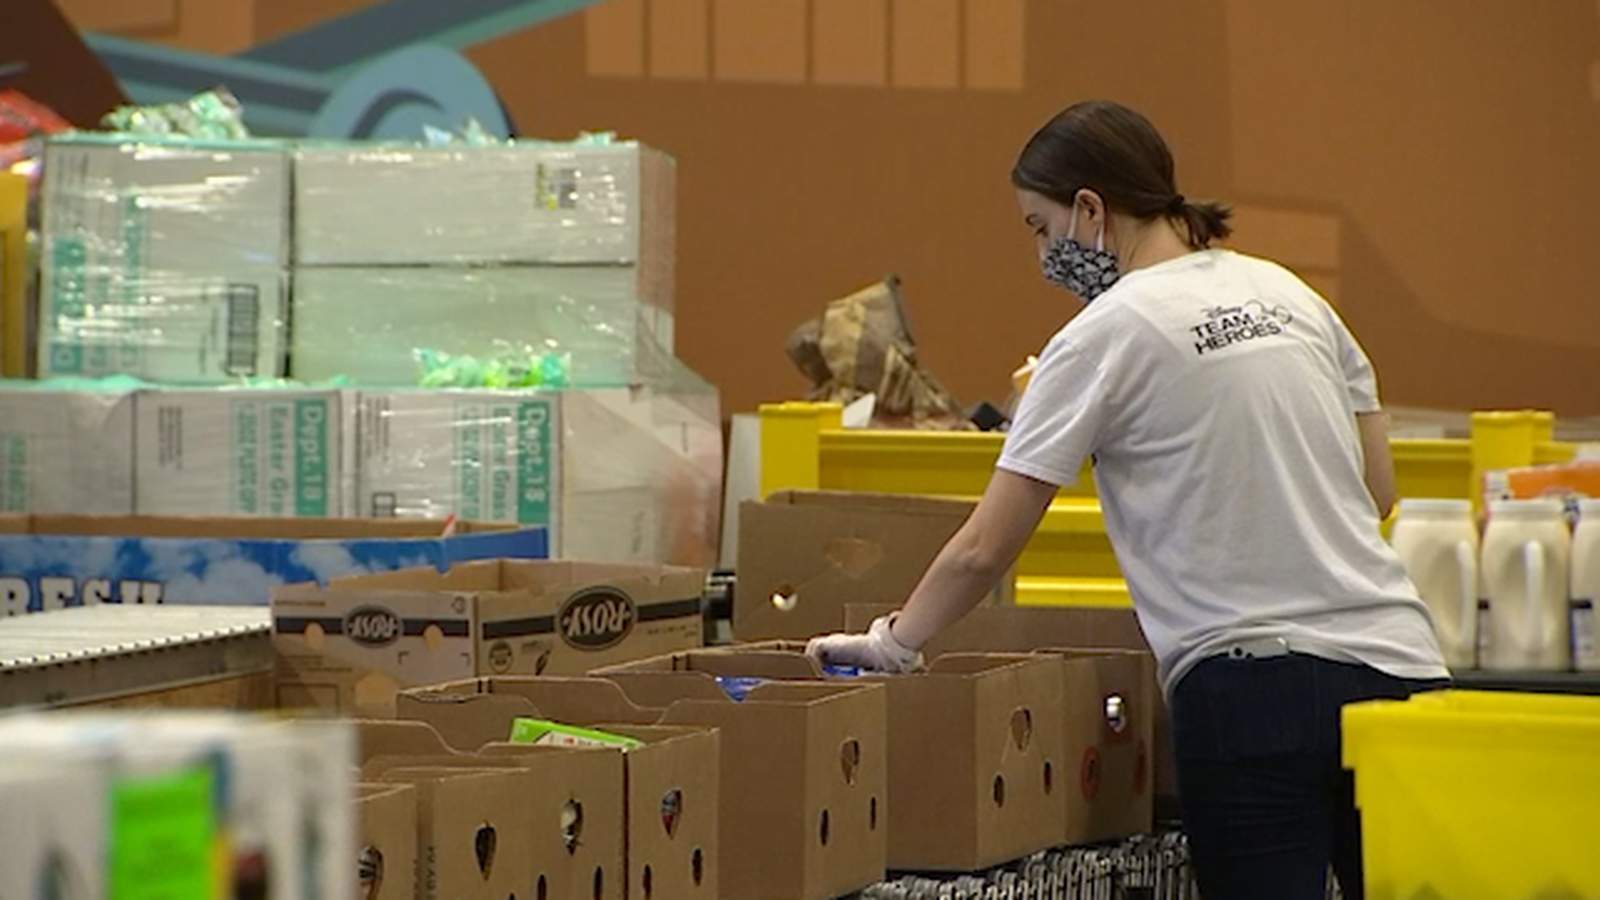 Here’s how Second Harvest Food Bank of Central Florida helps the community